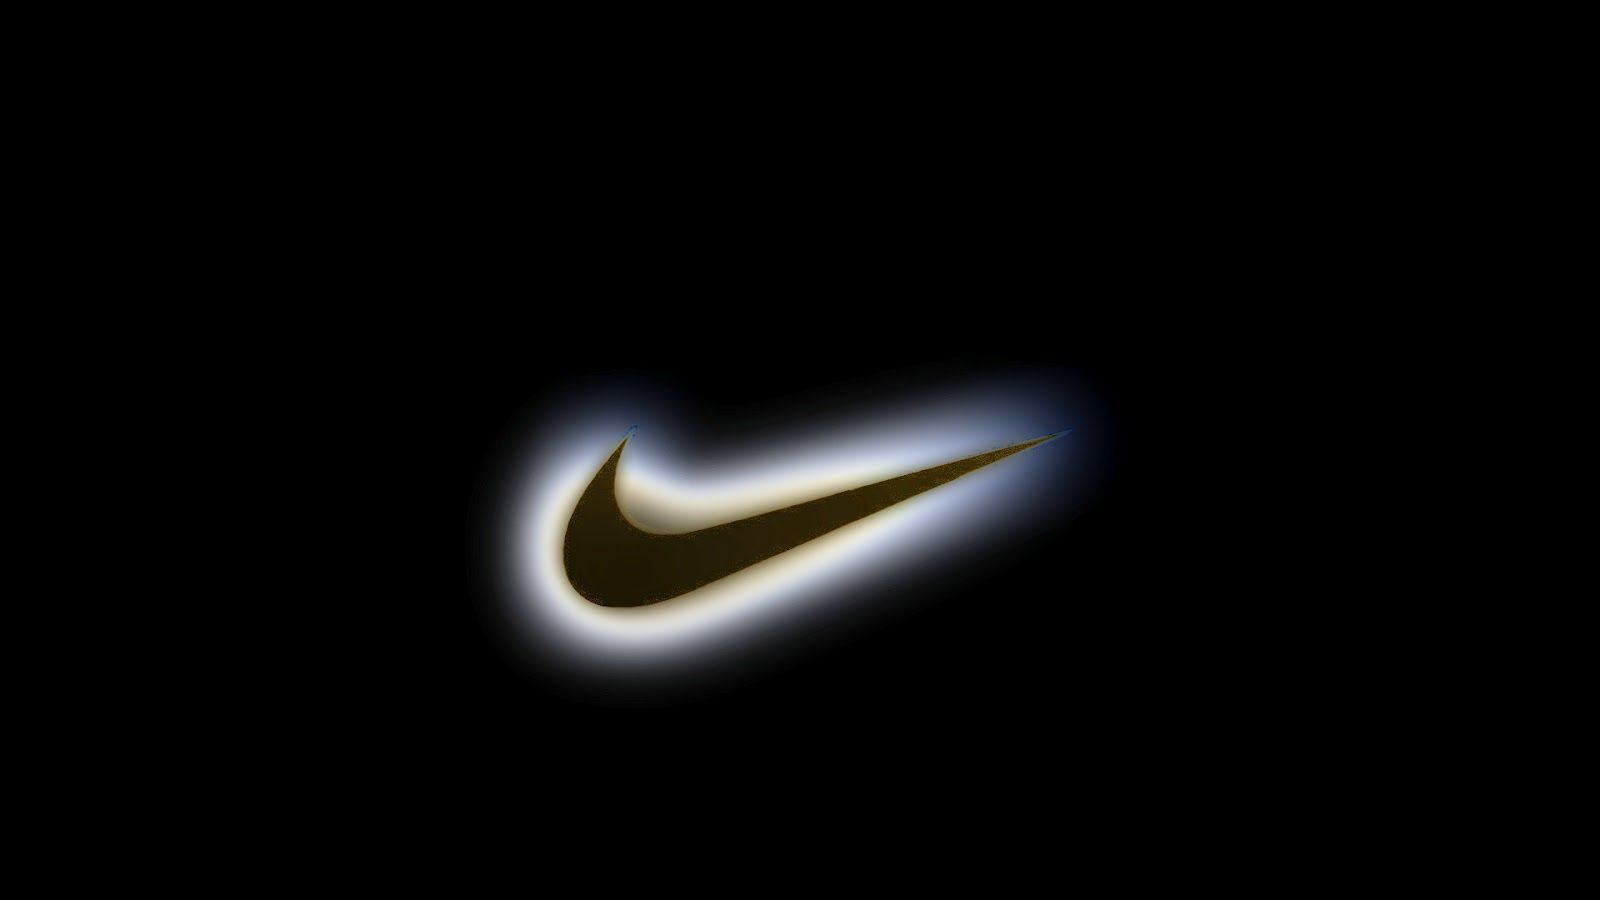 All Black Nike Check Wallpapers on